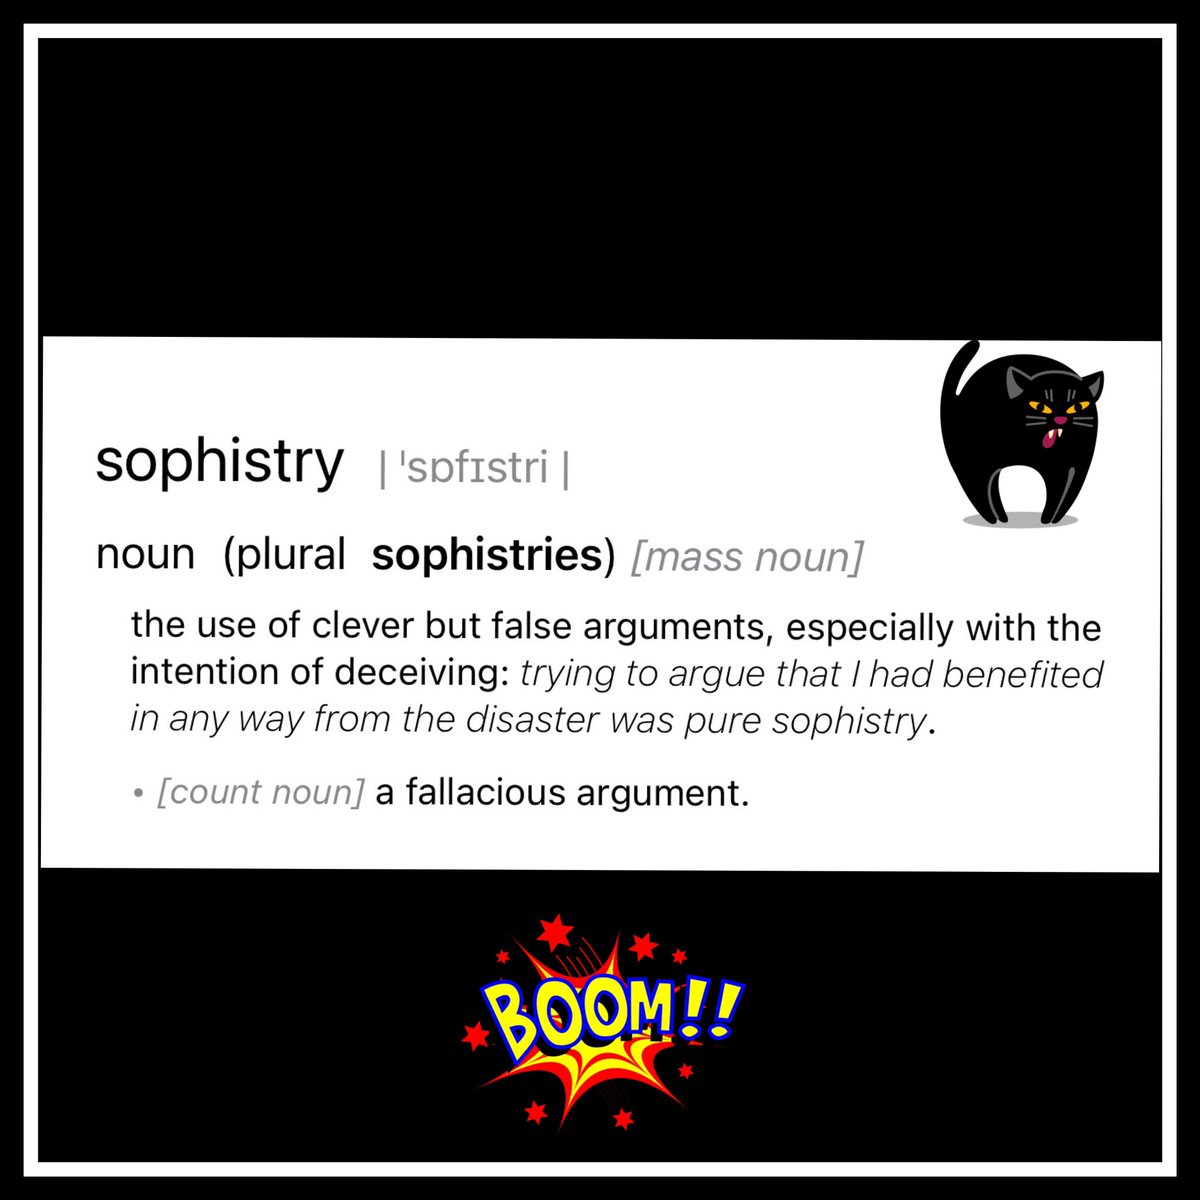 @TraceySpicer Ancient Greek philosophers had a word. 
The sophists practicing the dark art of sophistry.   

Humans don’t change.